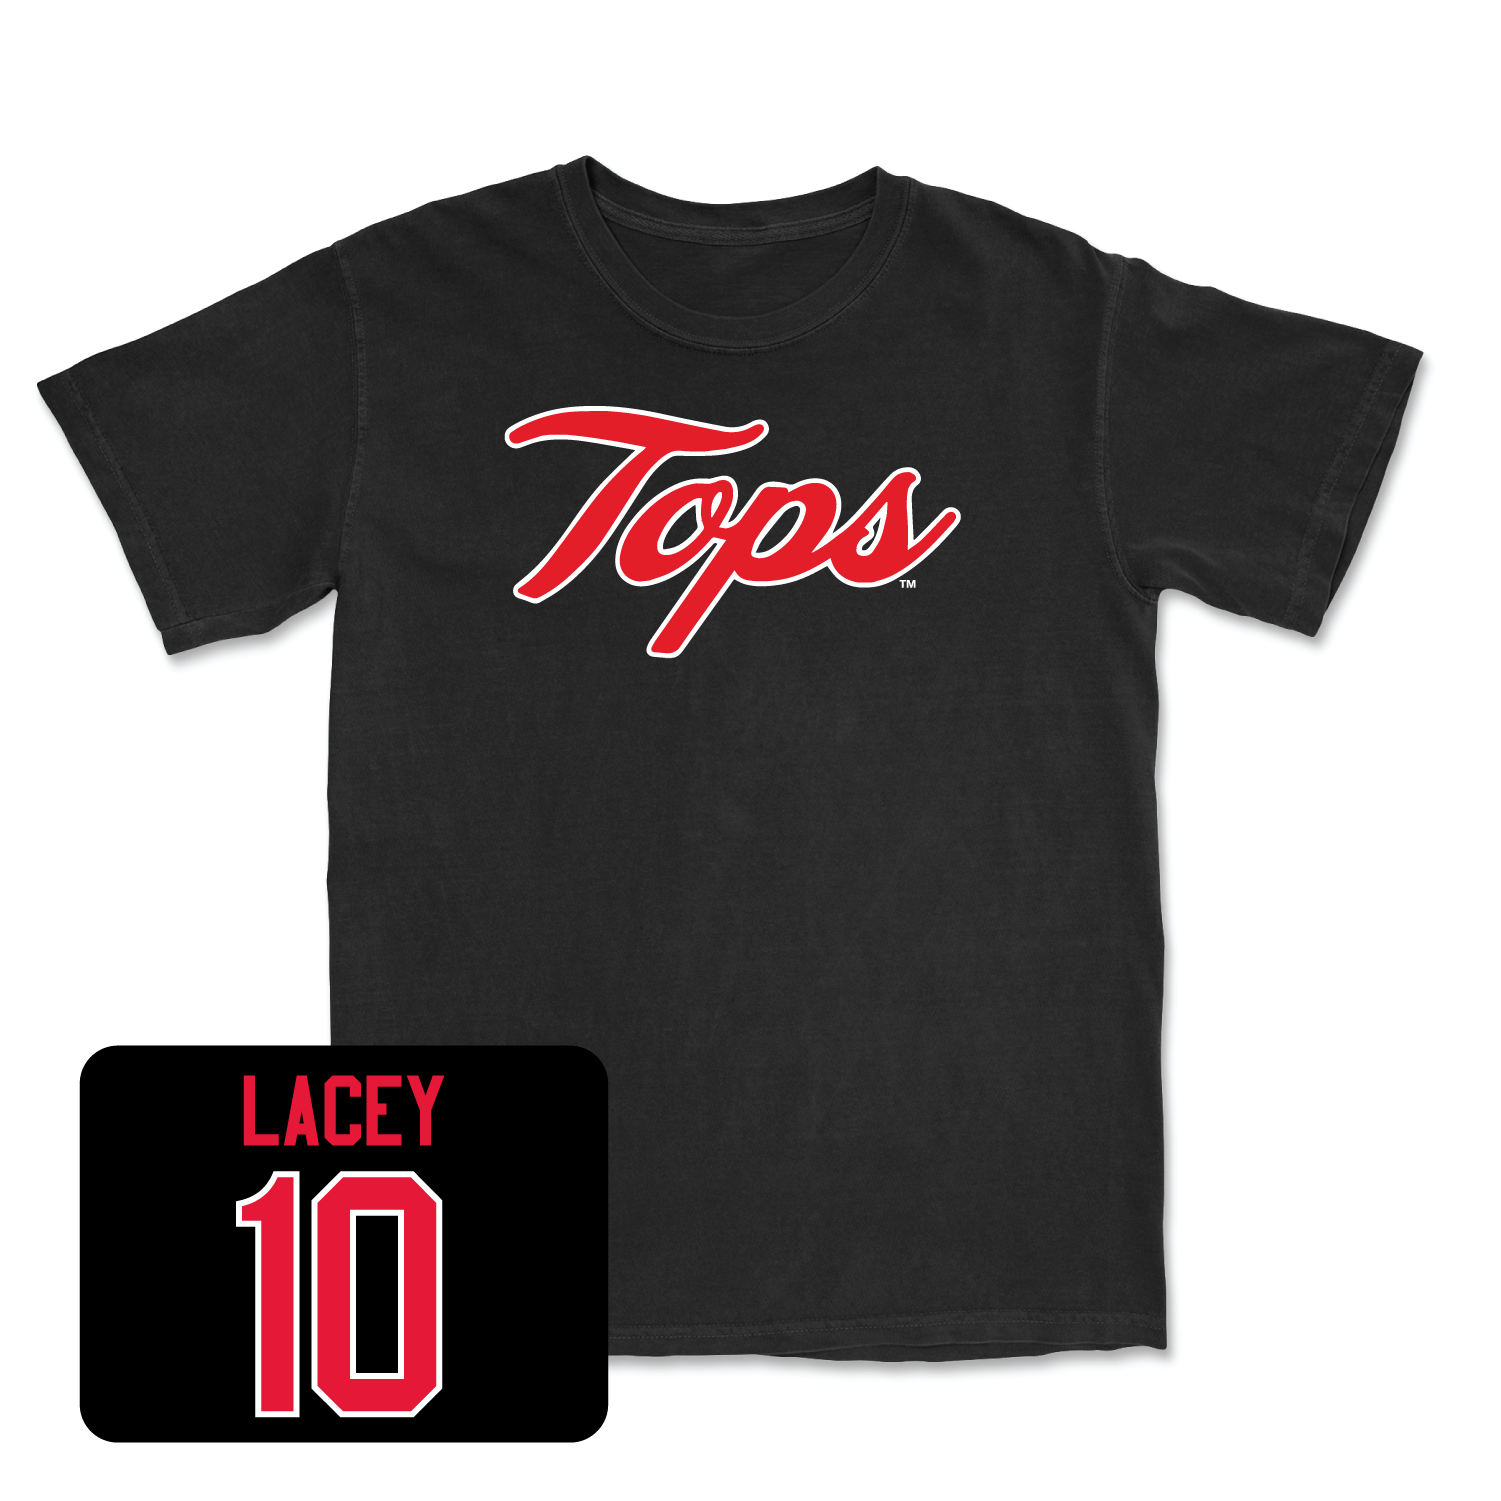 Black Women's Soccer Tops Tee 3 Youth Small / Paige Lacey | #10